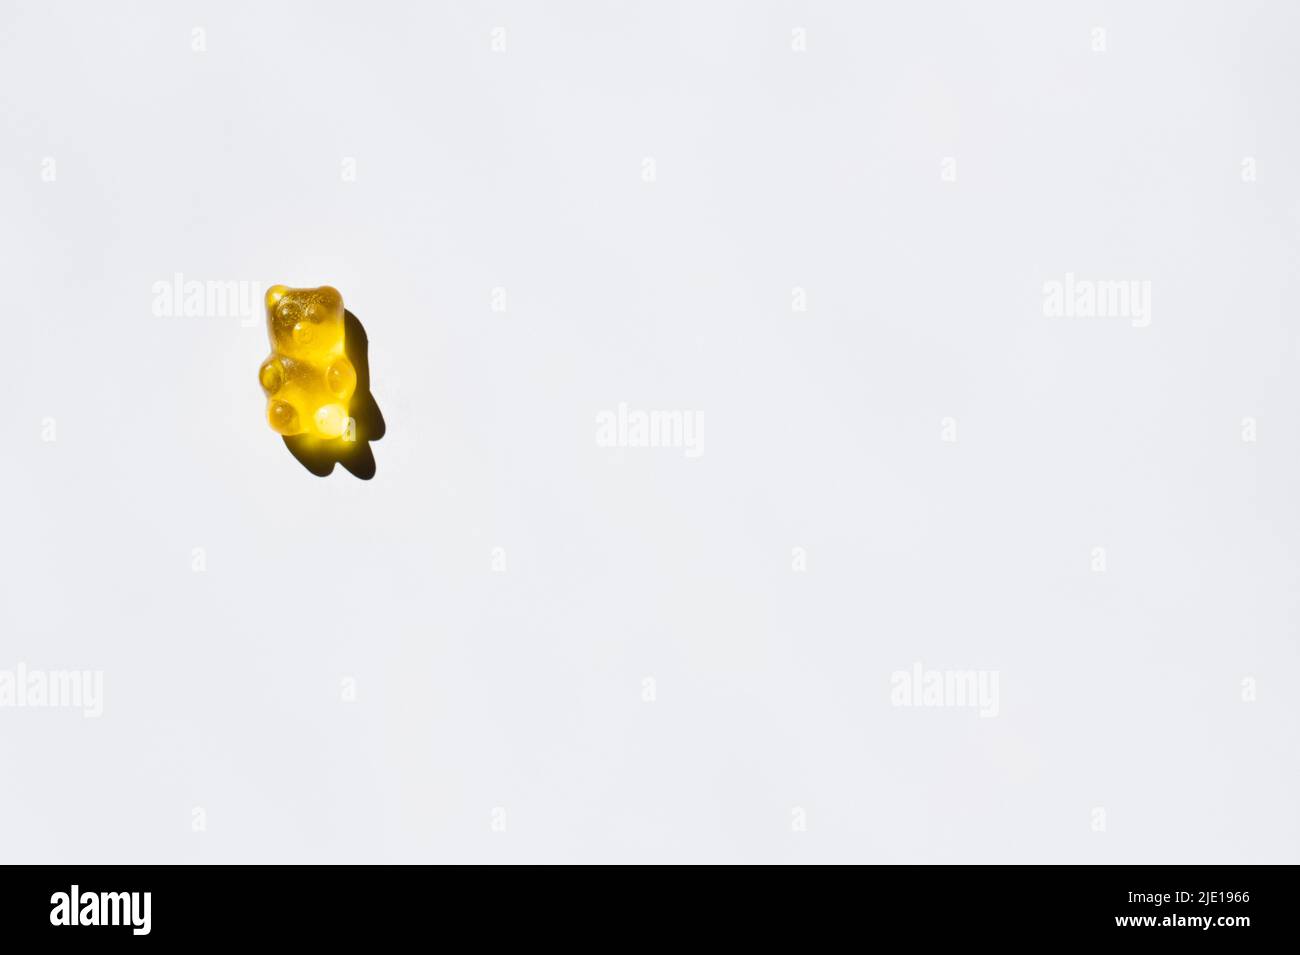 Top view of yellow gummy bear on white background Stock Photo